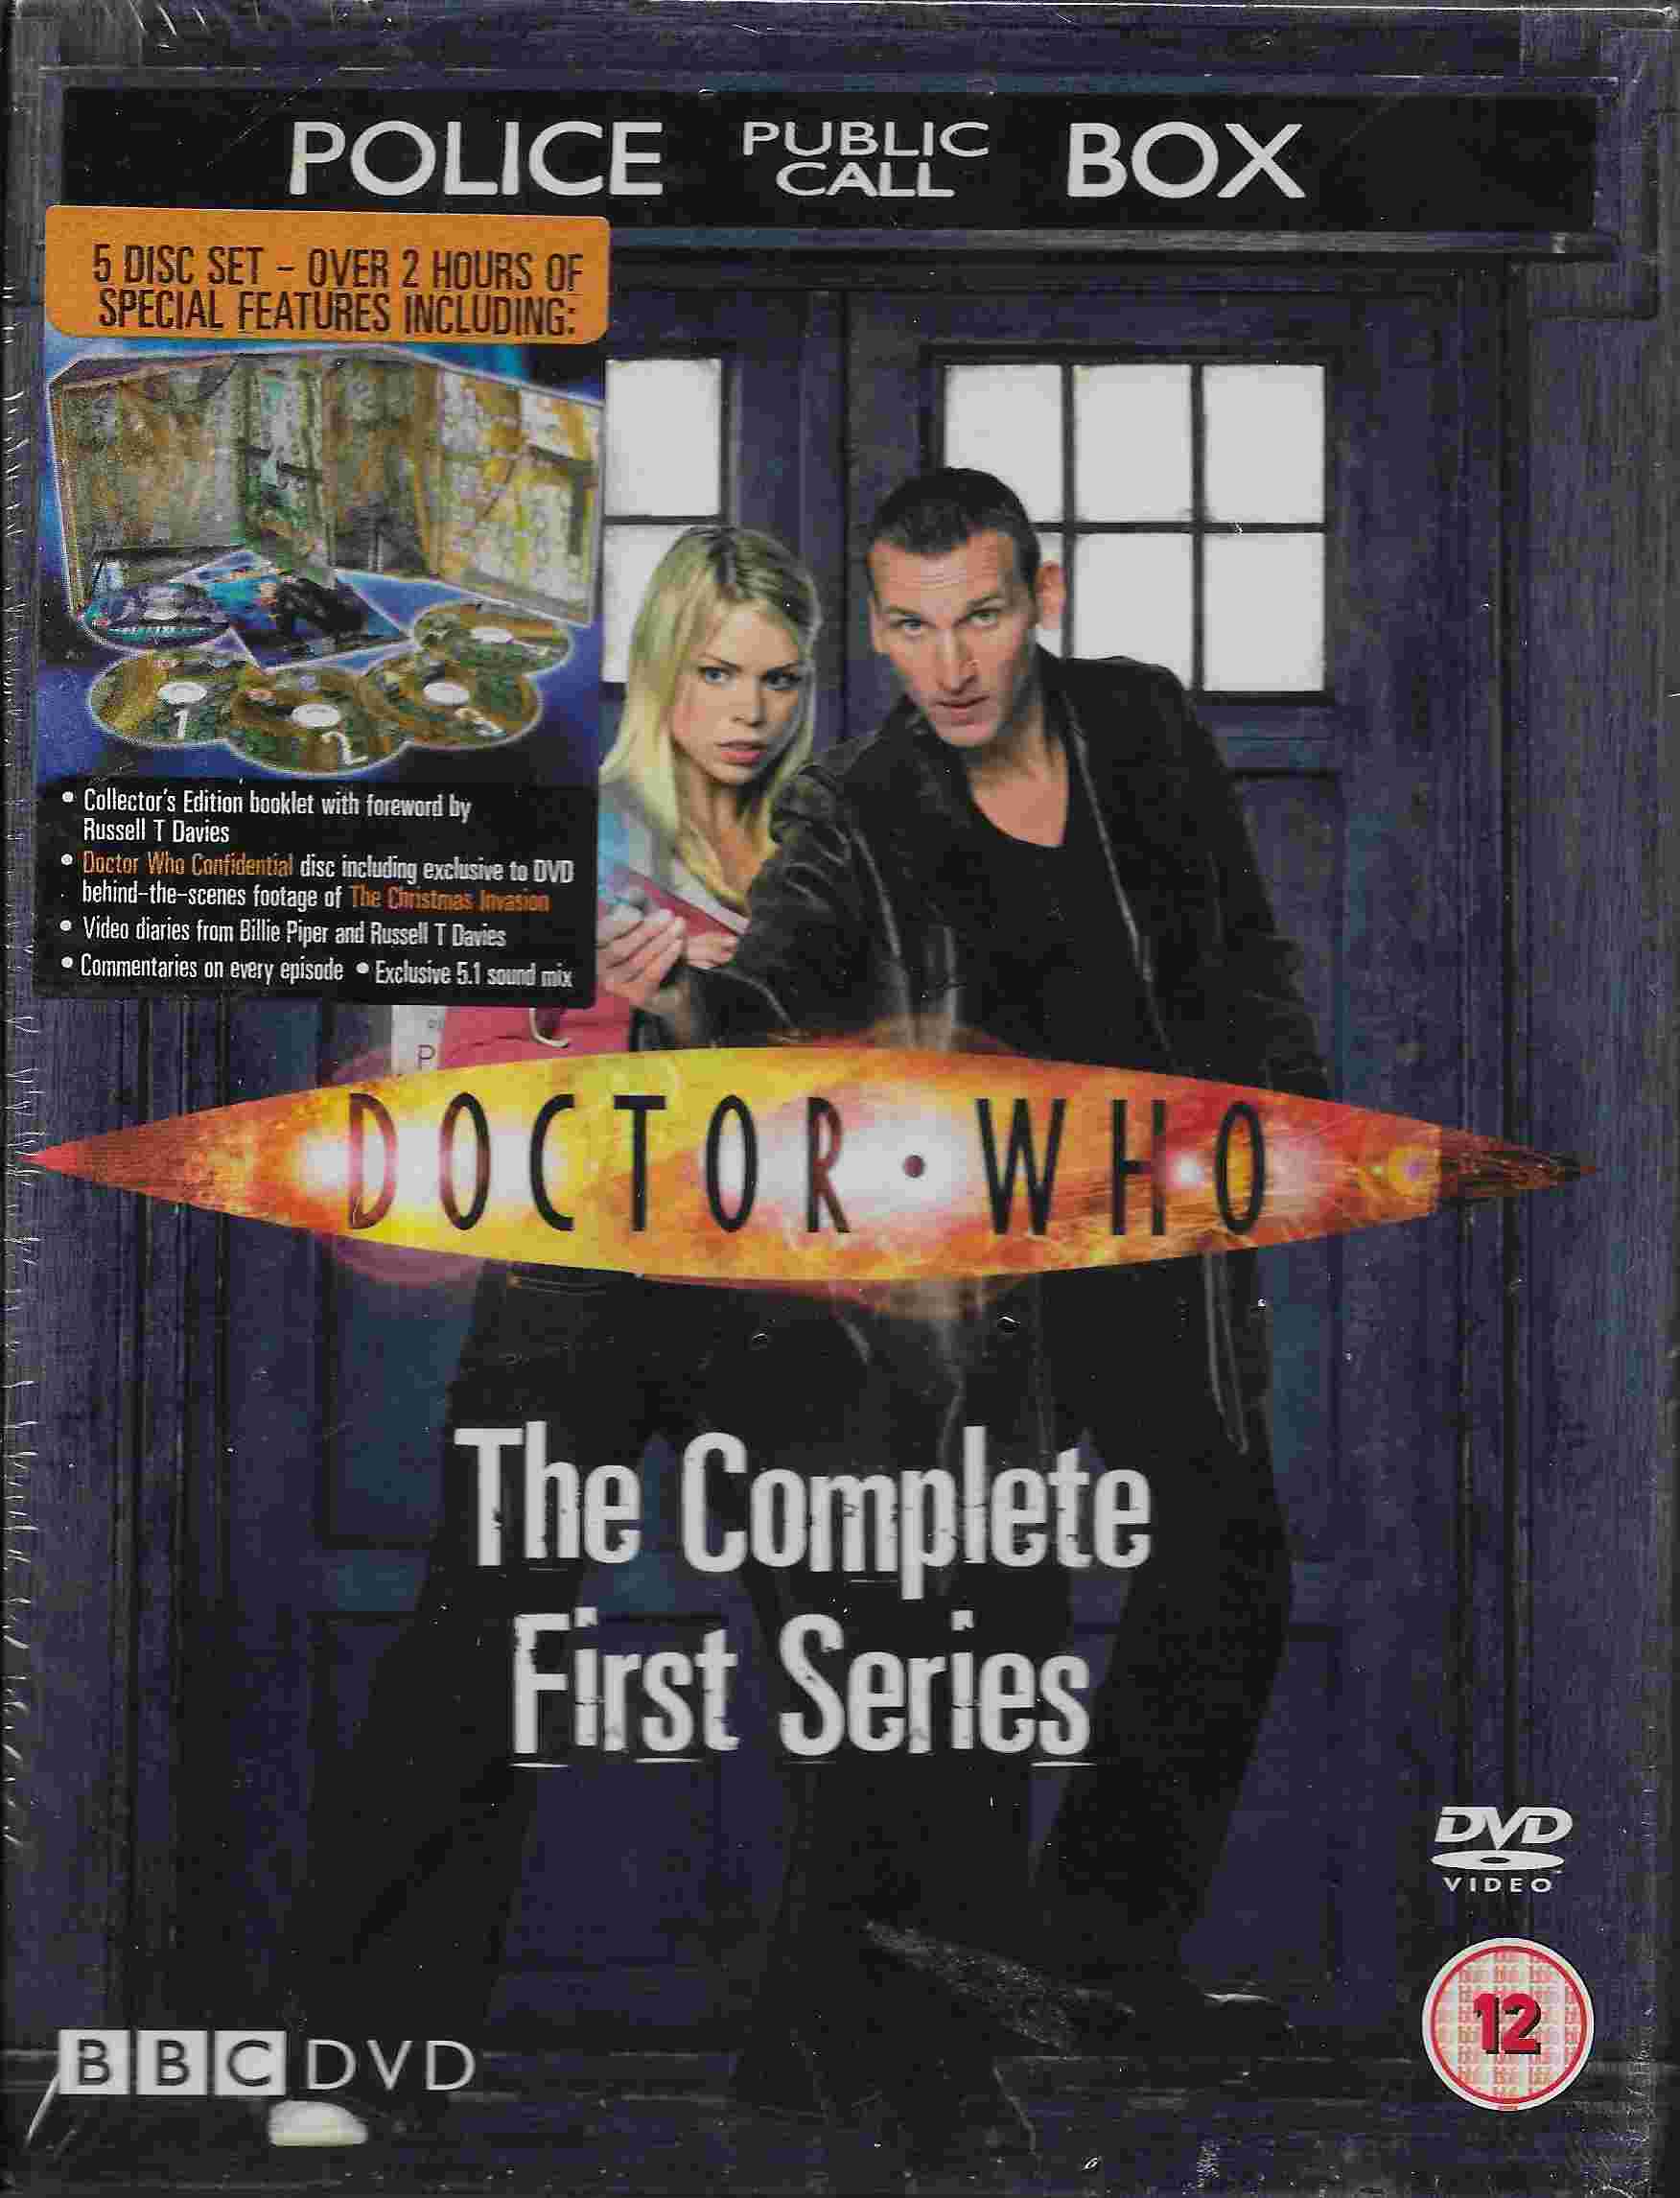 Picture of BBCDVD 1770S Doctor Who - Series 1 by artist Various from the BBC dvds - Records and Tapes library